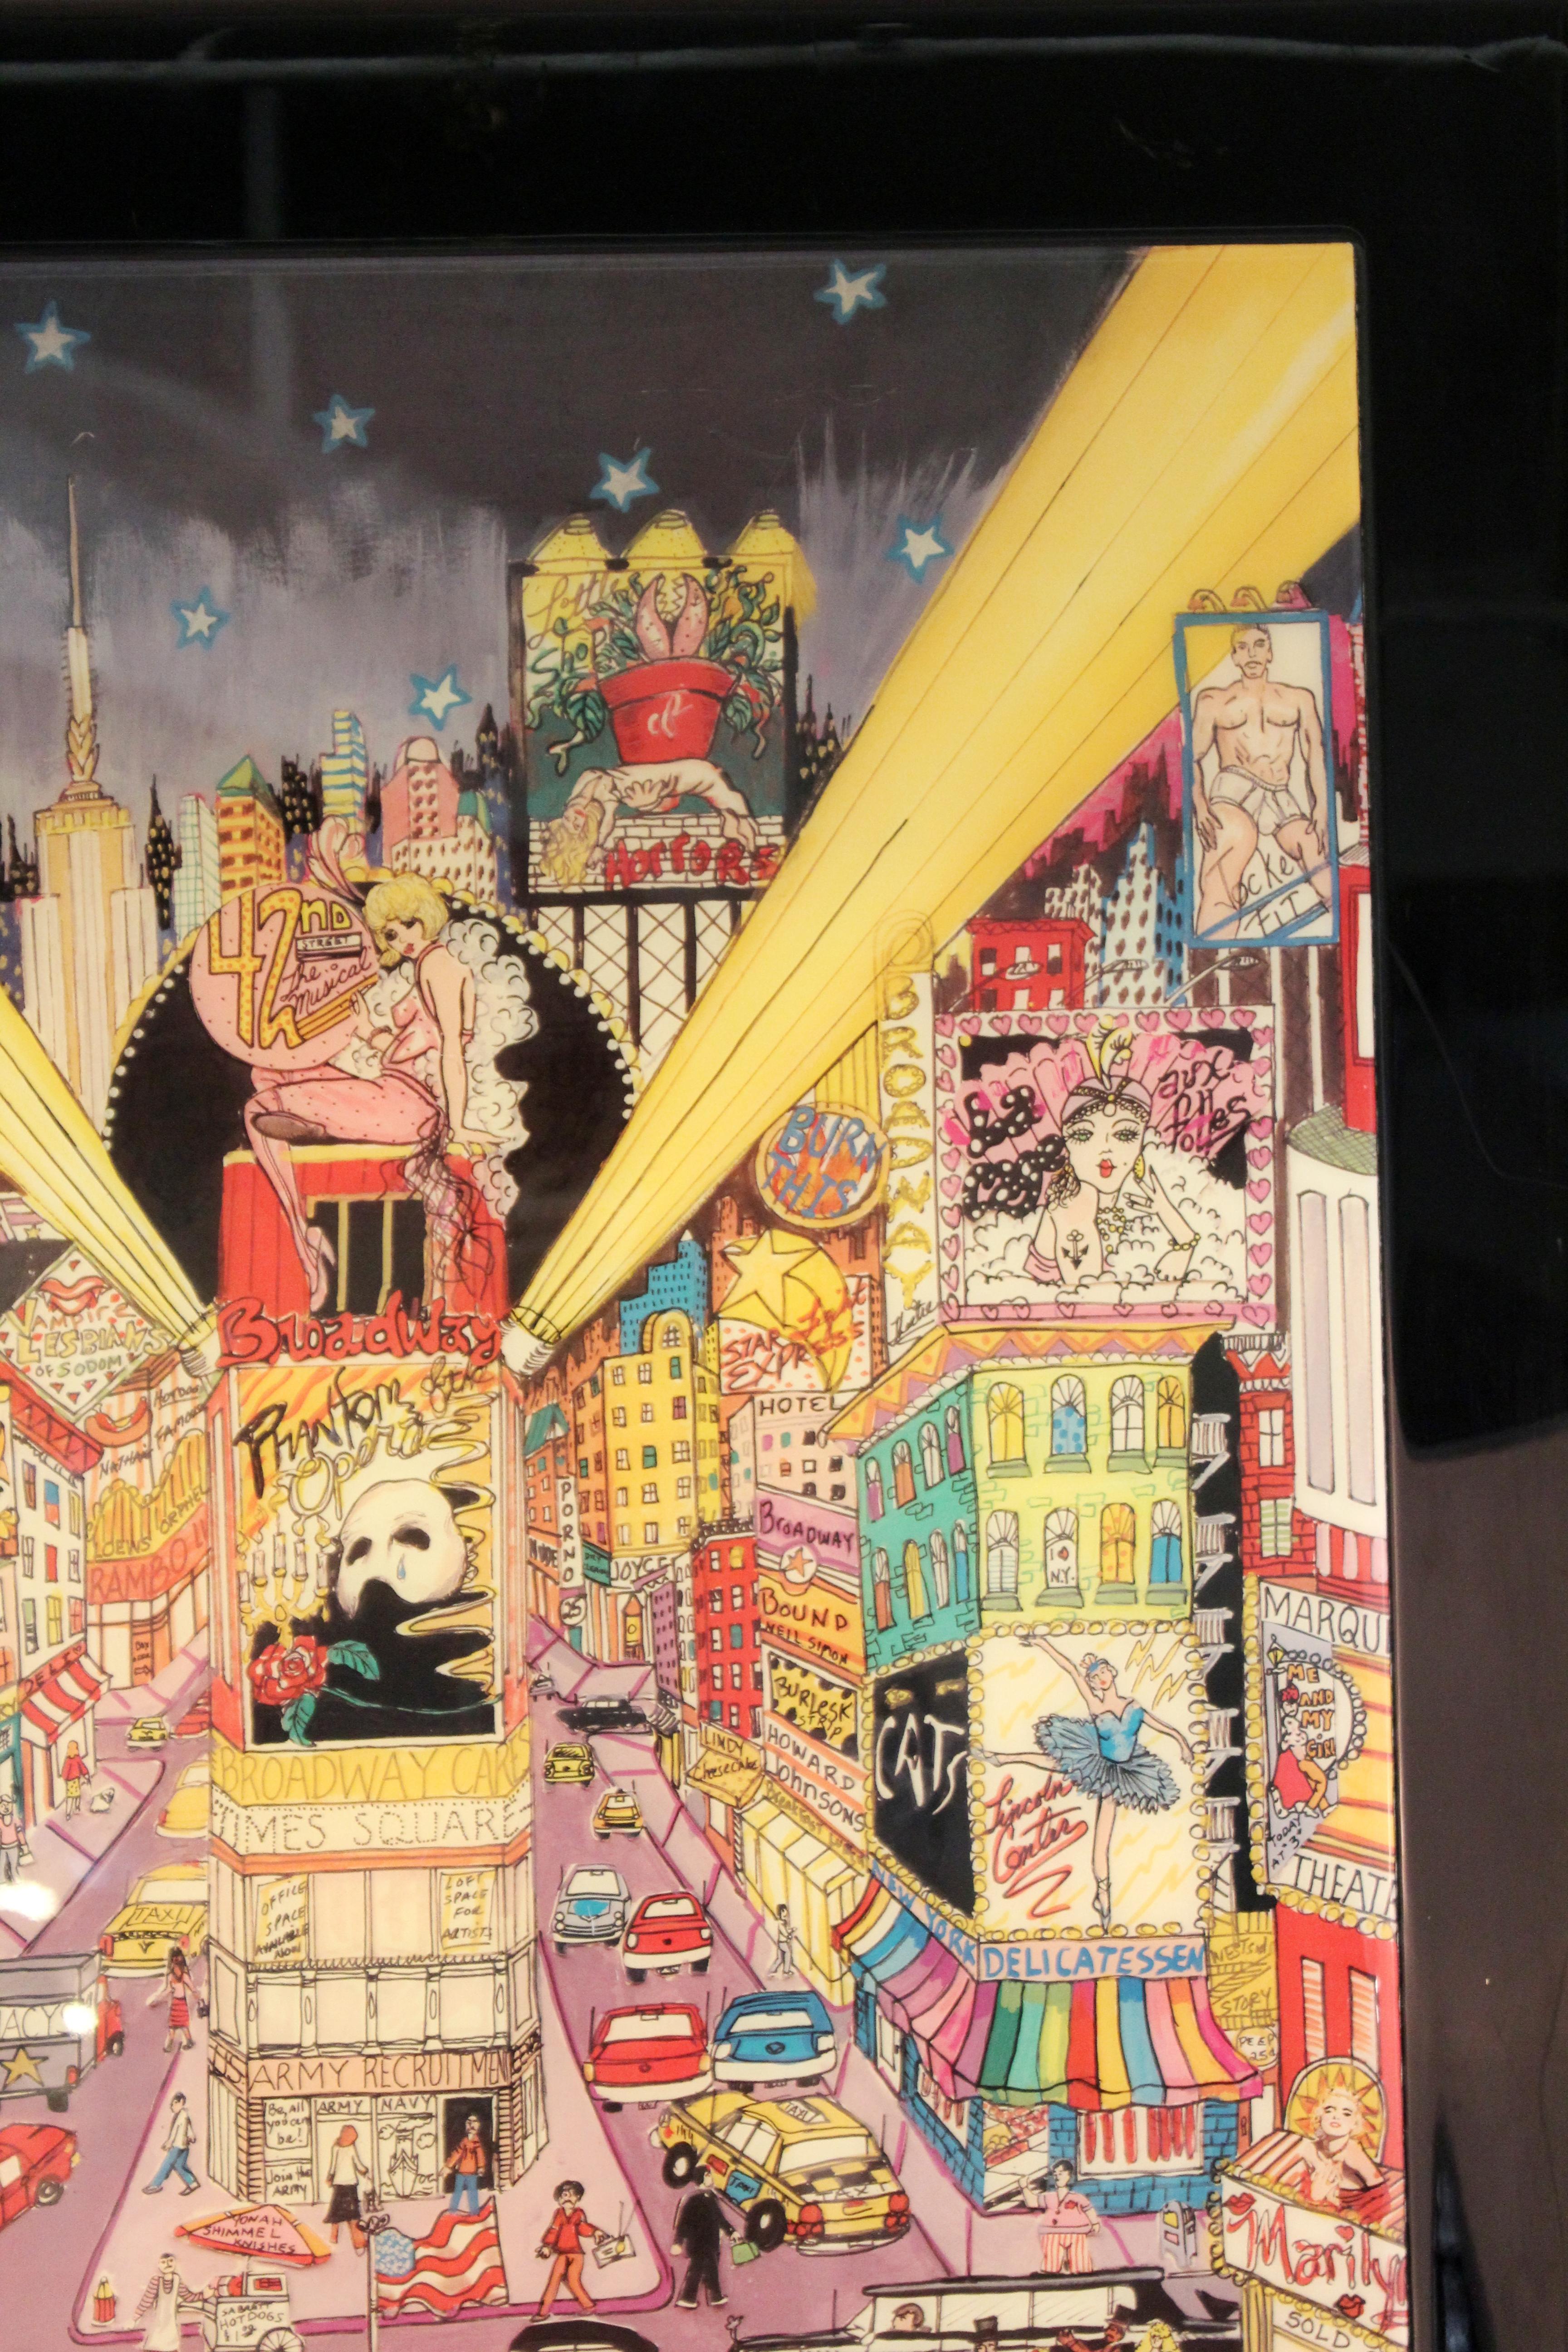 Postmodern acrylic drawing of Times Square in New York City, drawn by New-York pop artist Charles Fazzino in the 1980s. The piece depicts a highly detailed view of the many billboards and visitors to Times Square and is in great vintage condition.